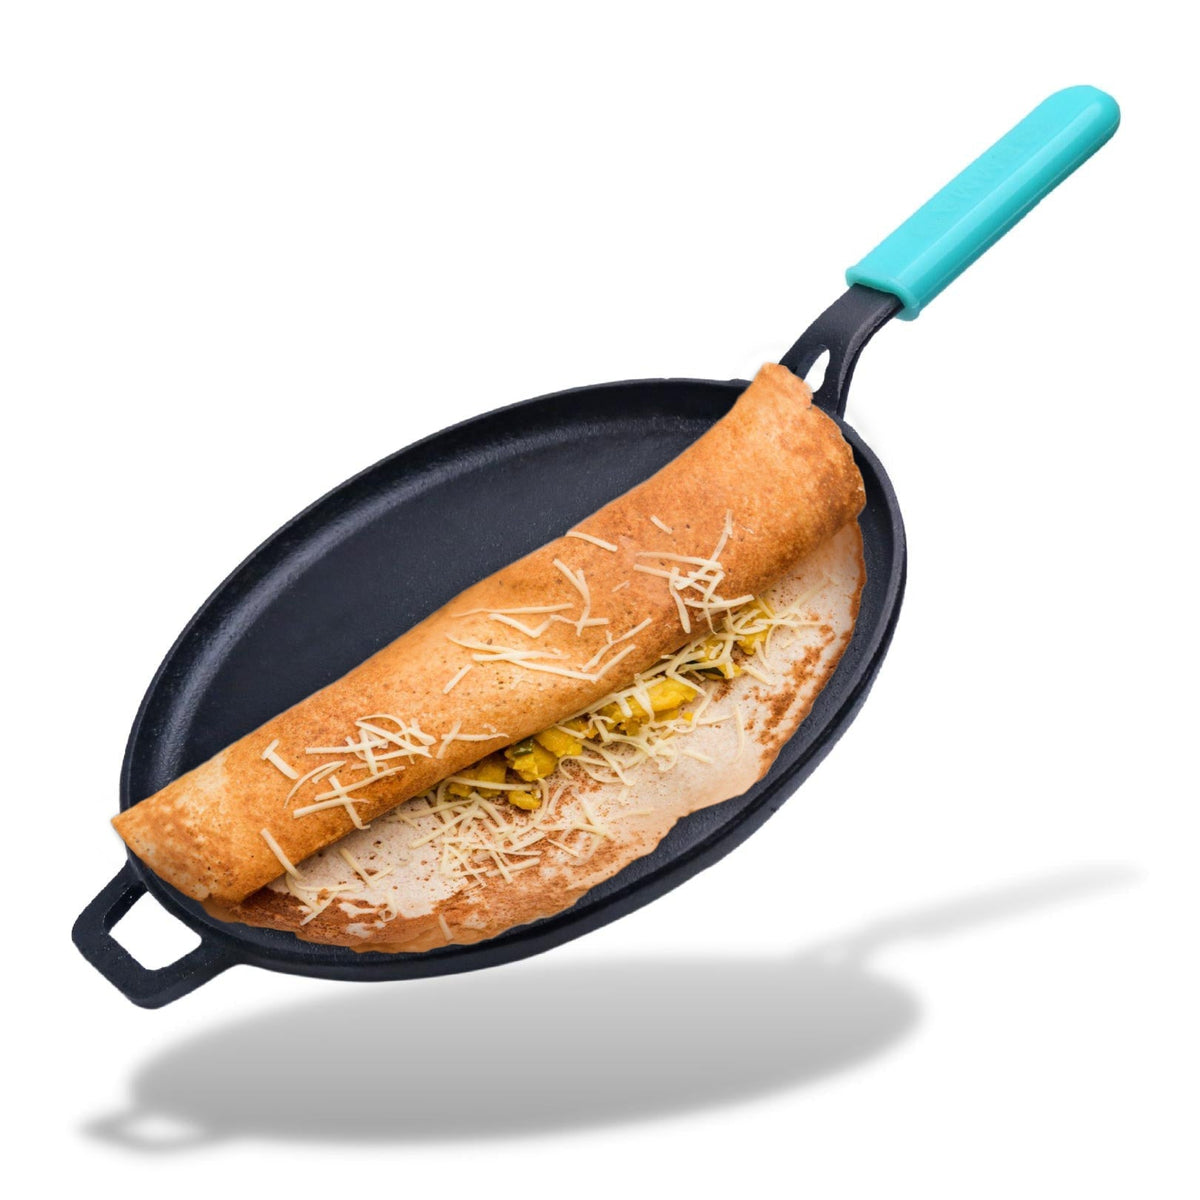 GEMMA Cast Iron Dosa Tawa with Long Handle |28cm|Pre-seasoned Pan |Non Toxic|Stick Free |Weight-(2.2 kg) |Induction Base Compatible, Silicone Grip|